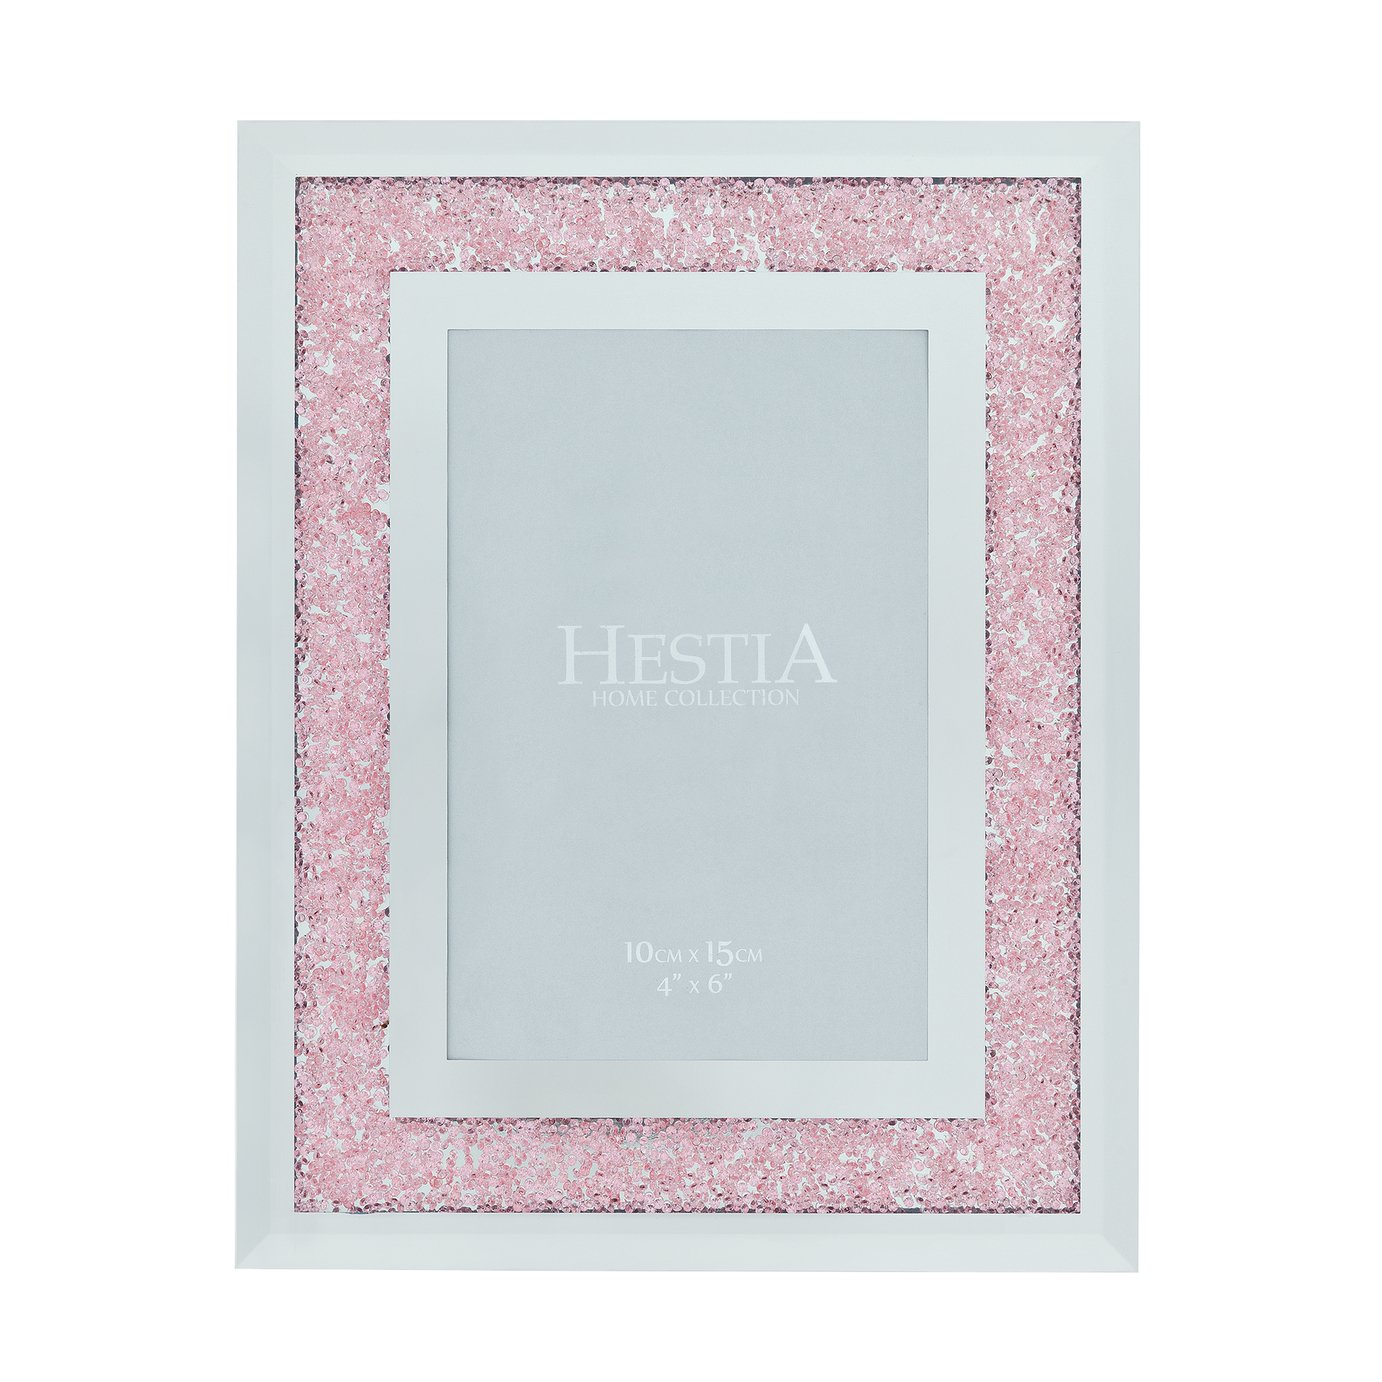 Argos Home Hestia Crystal 4x6in Photo Frame - Pink